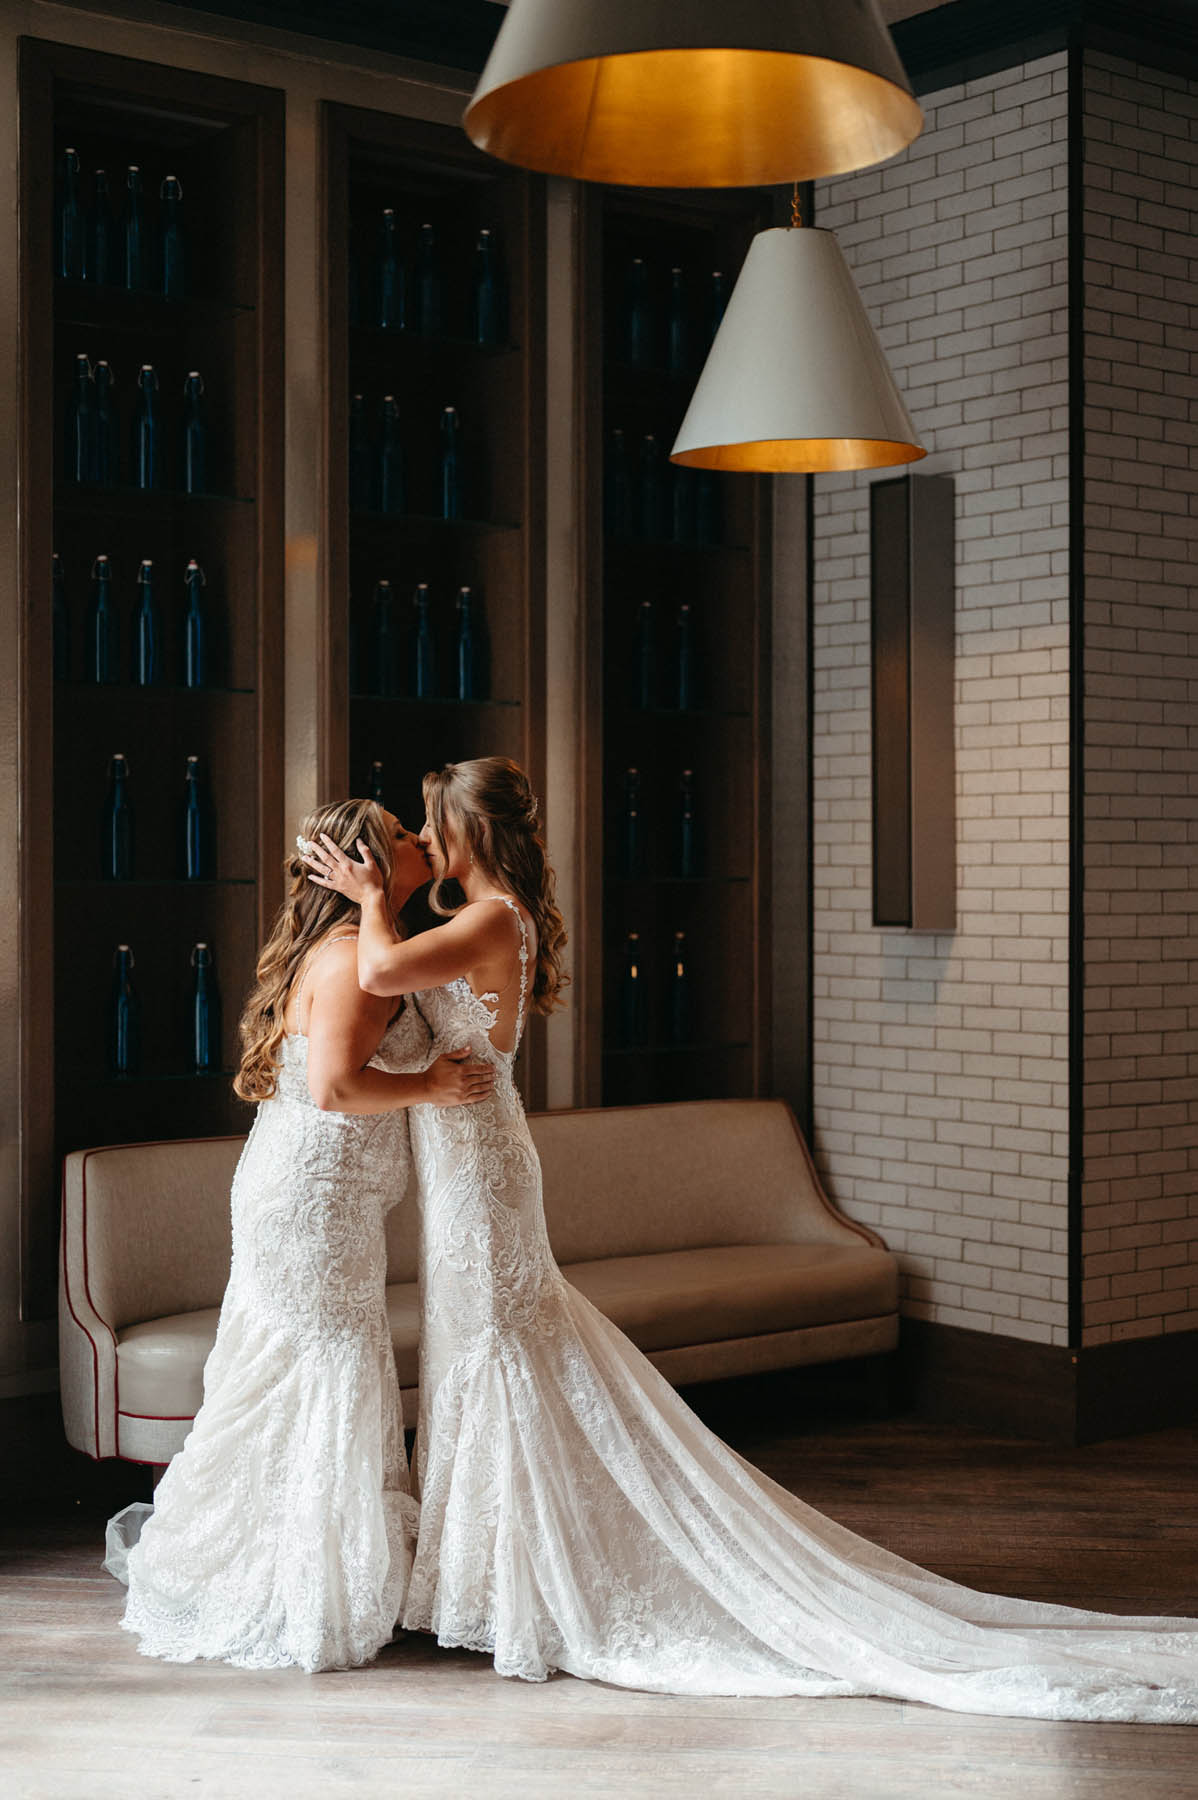 The brides kiss as they stand in their lace white gowns.